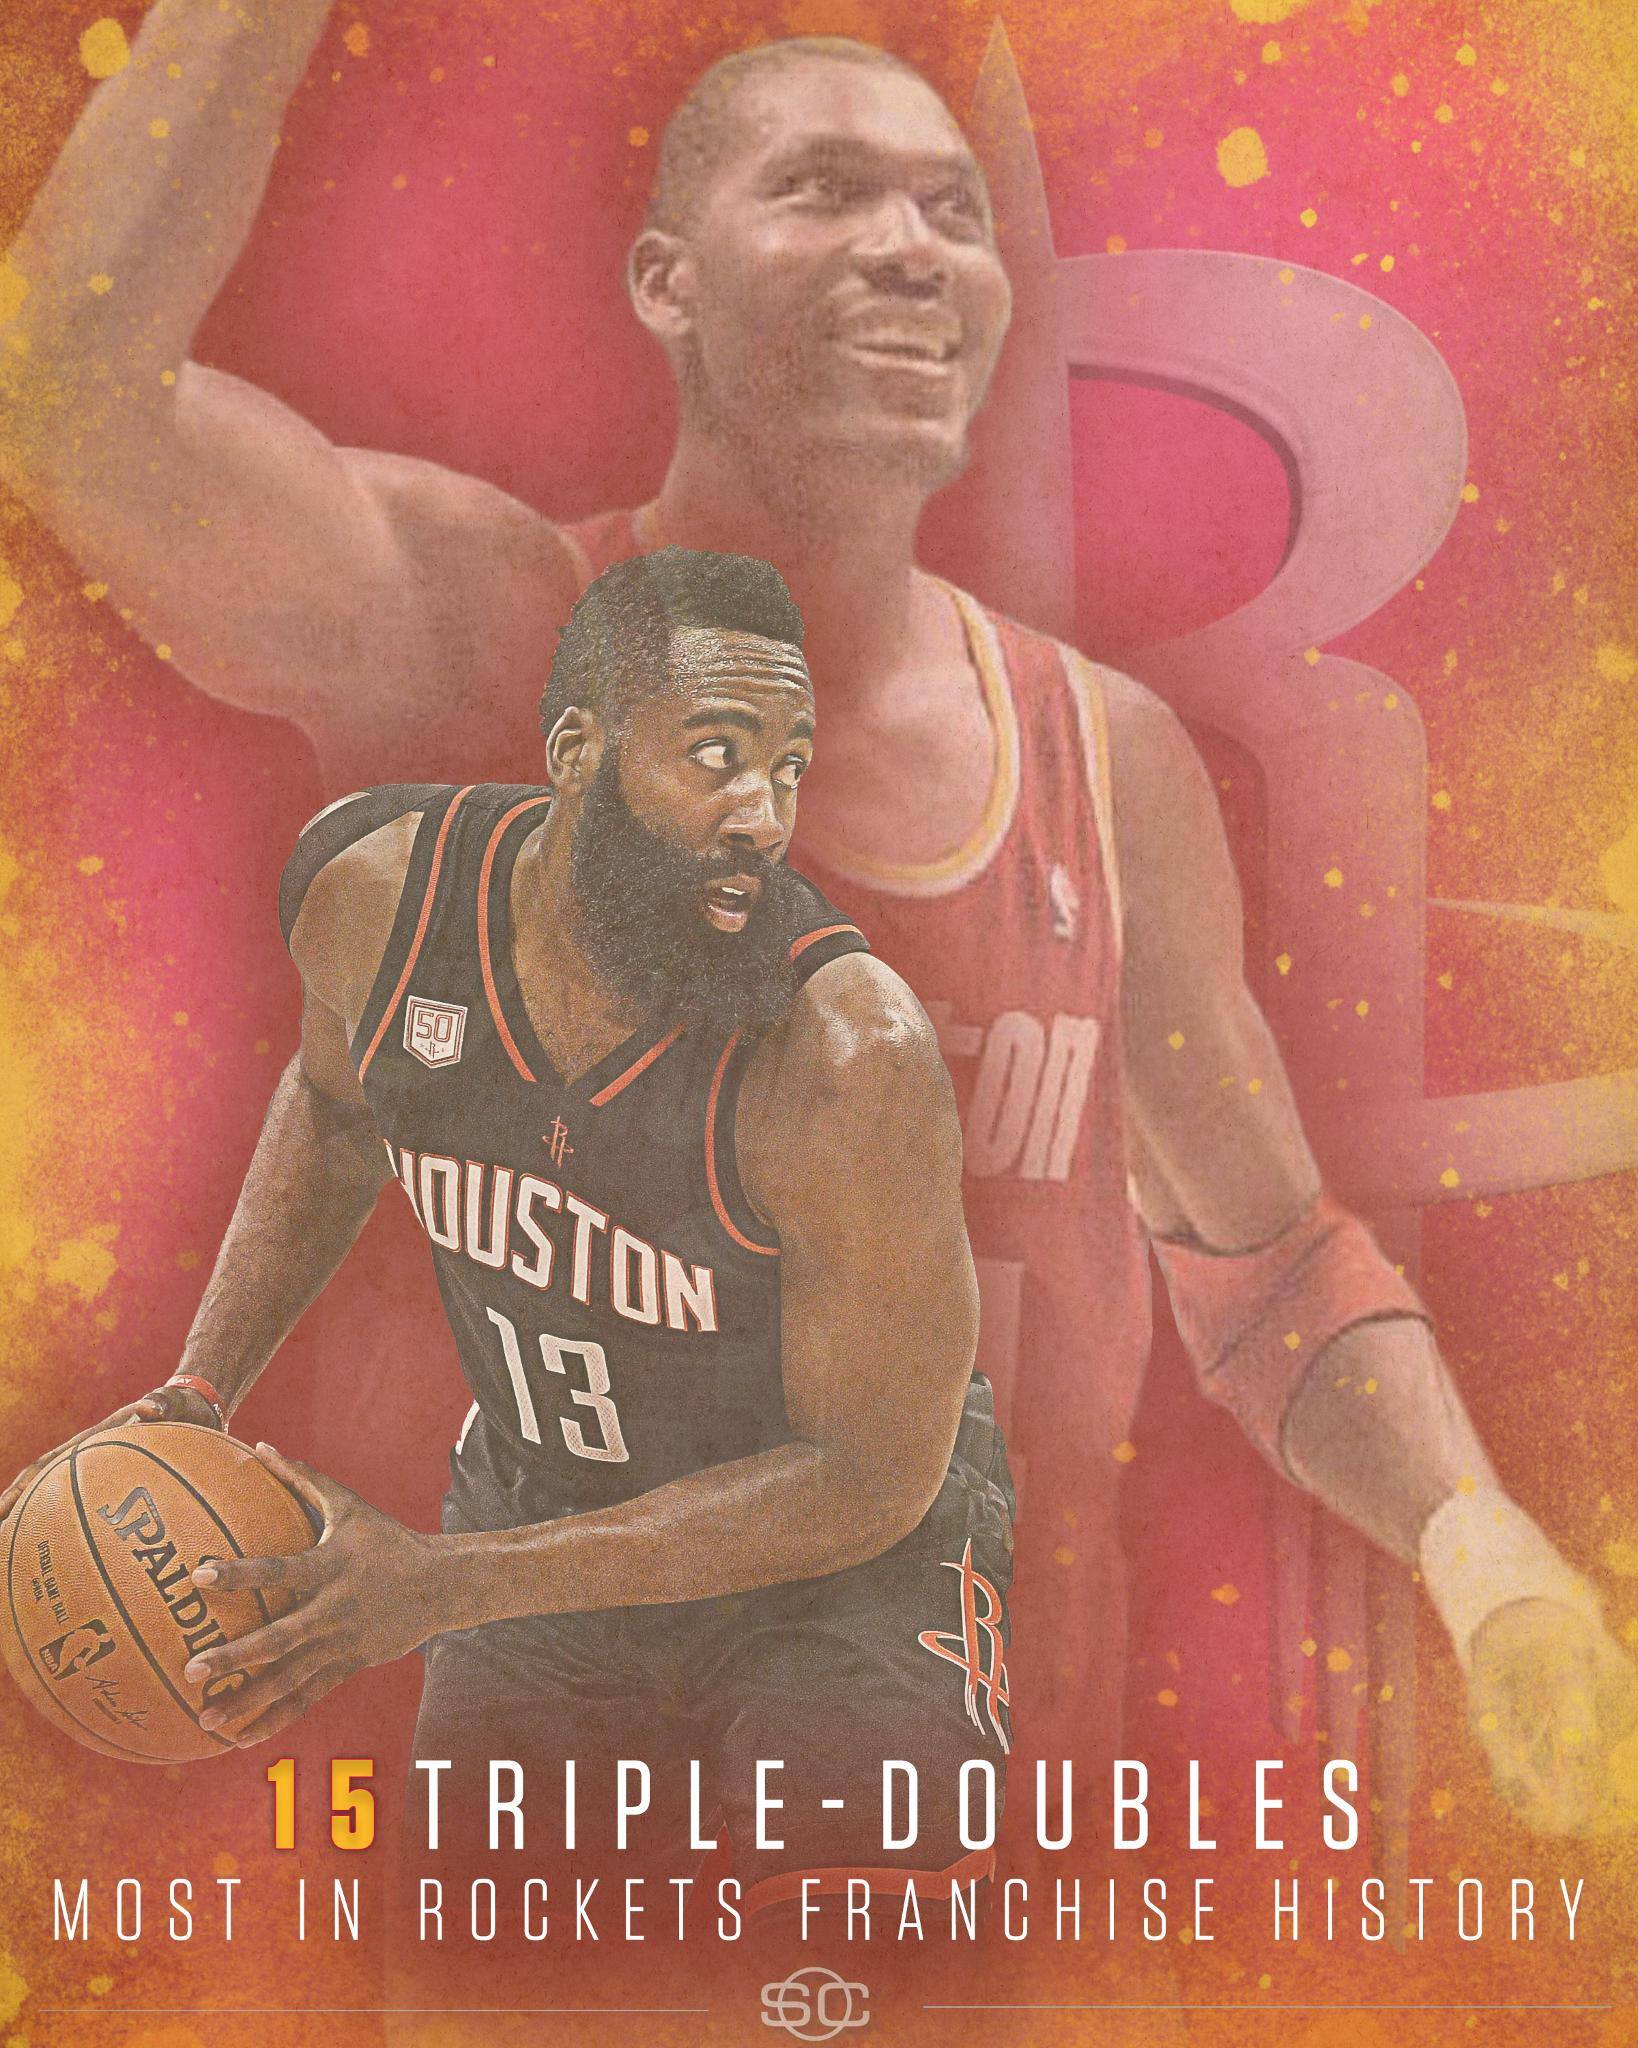 James Harden Records His 15th Career Triple Double, Passing Hakeem